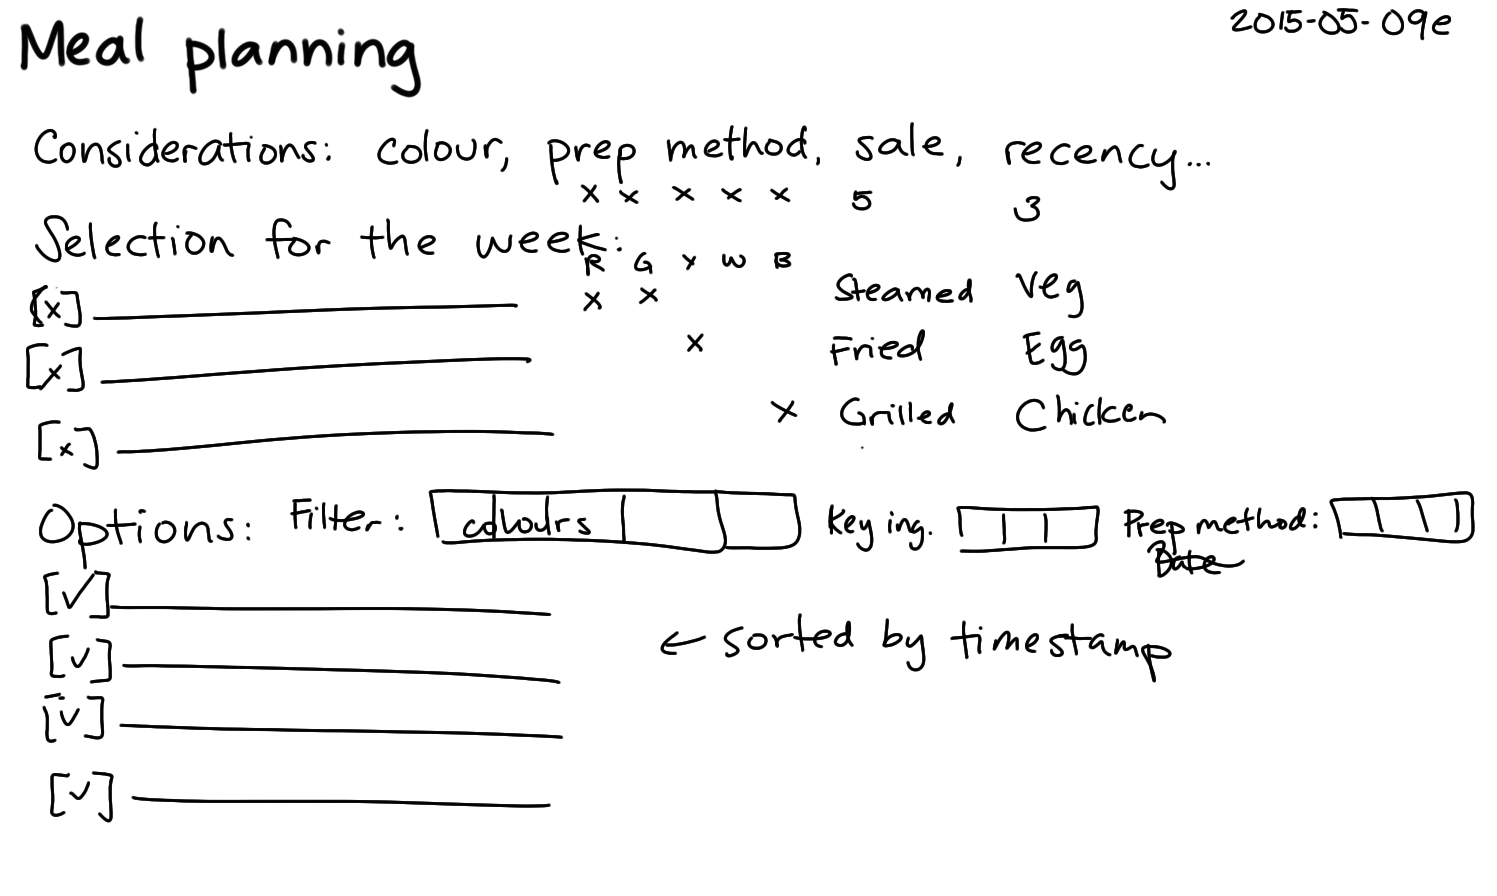 2015-05-09e Meal planning -- index card #emacs #cooking.png